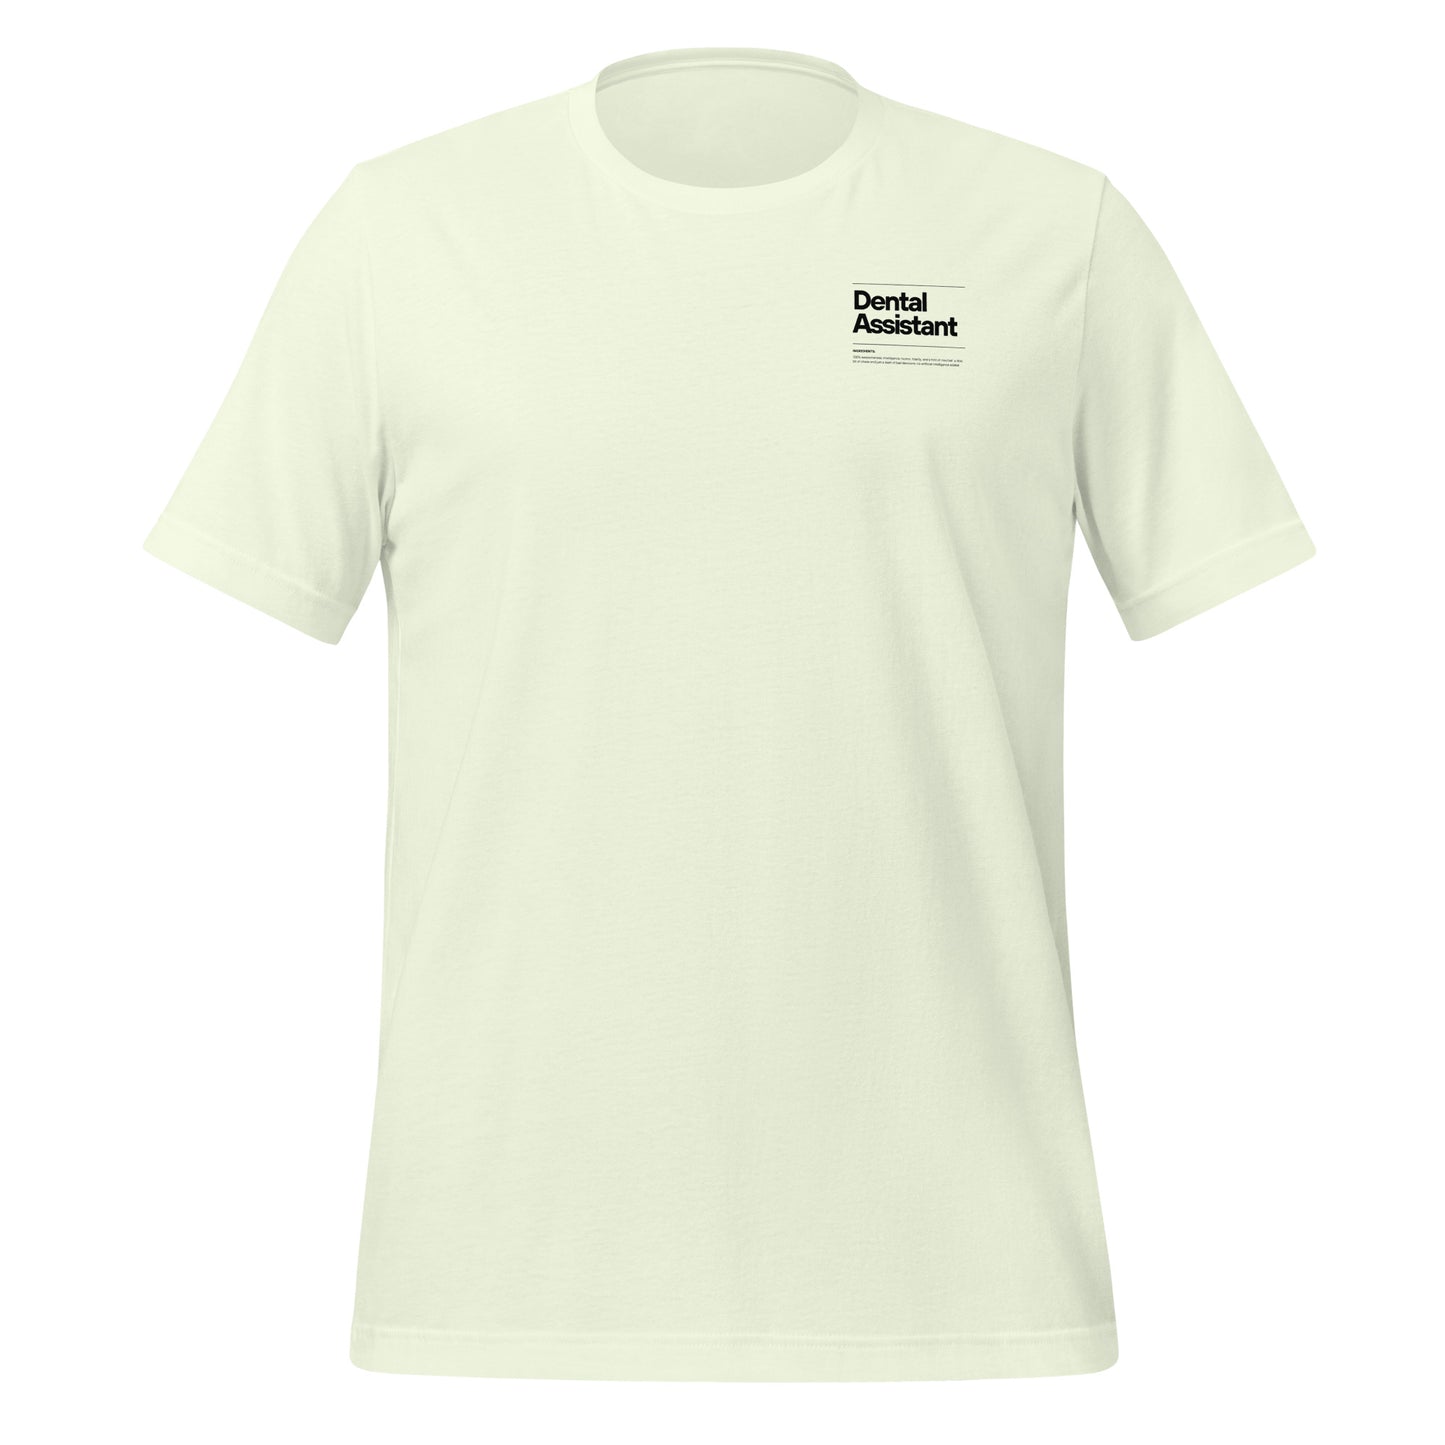 Citron dental assistant shirt featuring a creative label design with icons and text, perfect for dental assistants who want to express their identity and passion for their job - dental shirts front view.